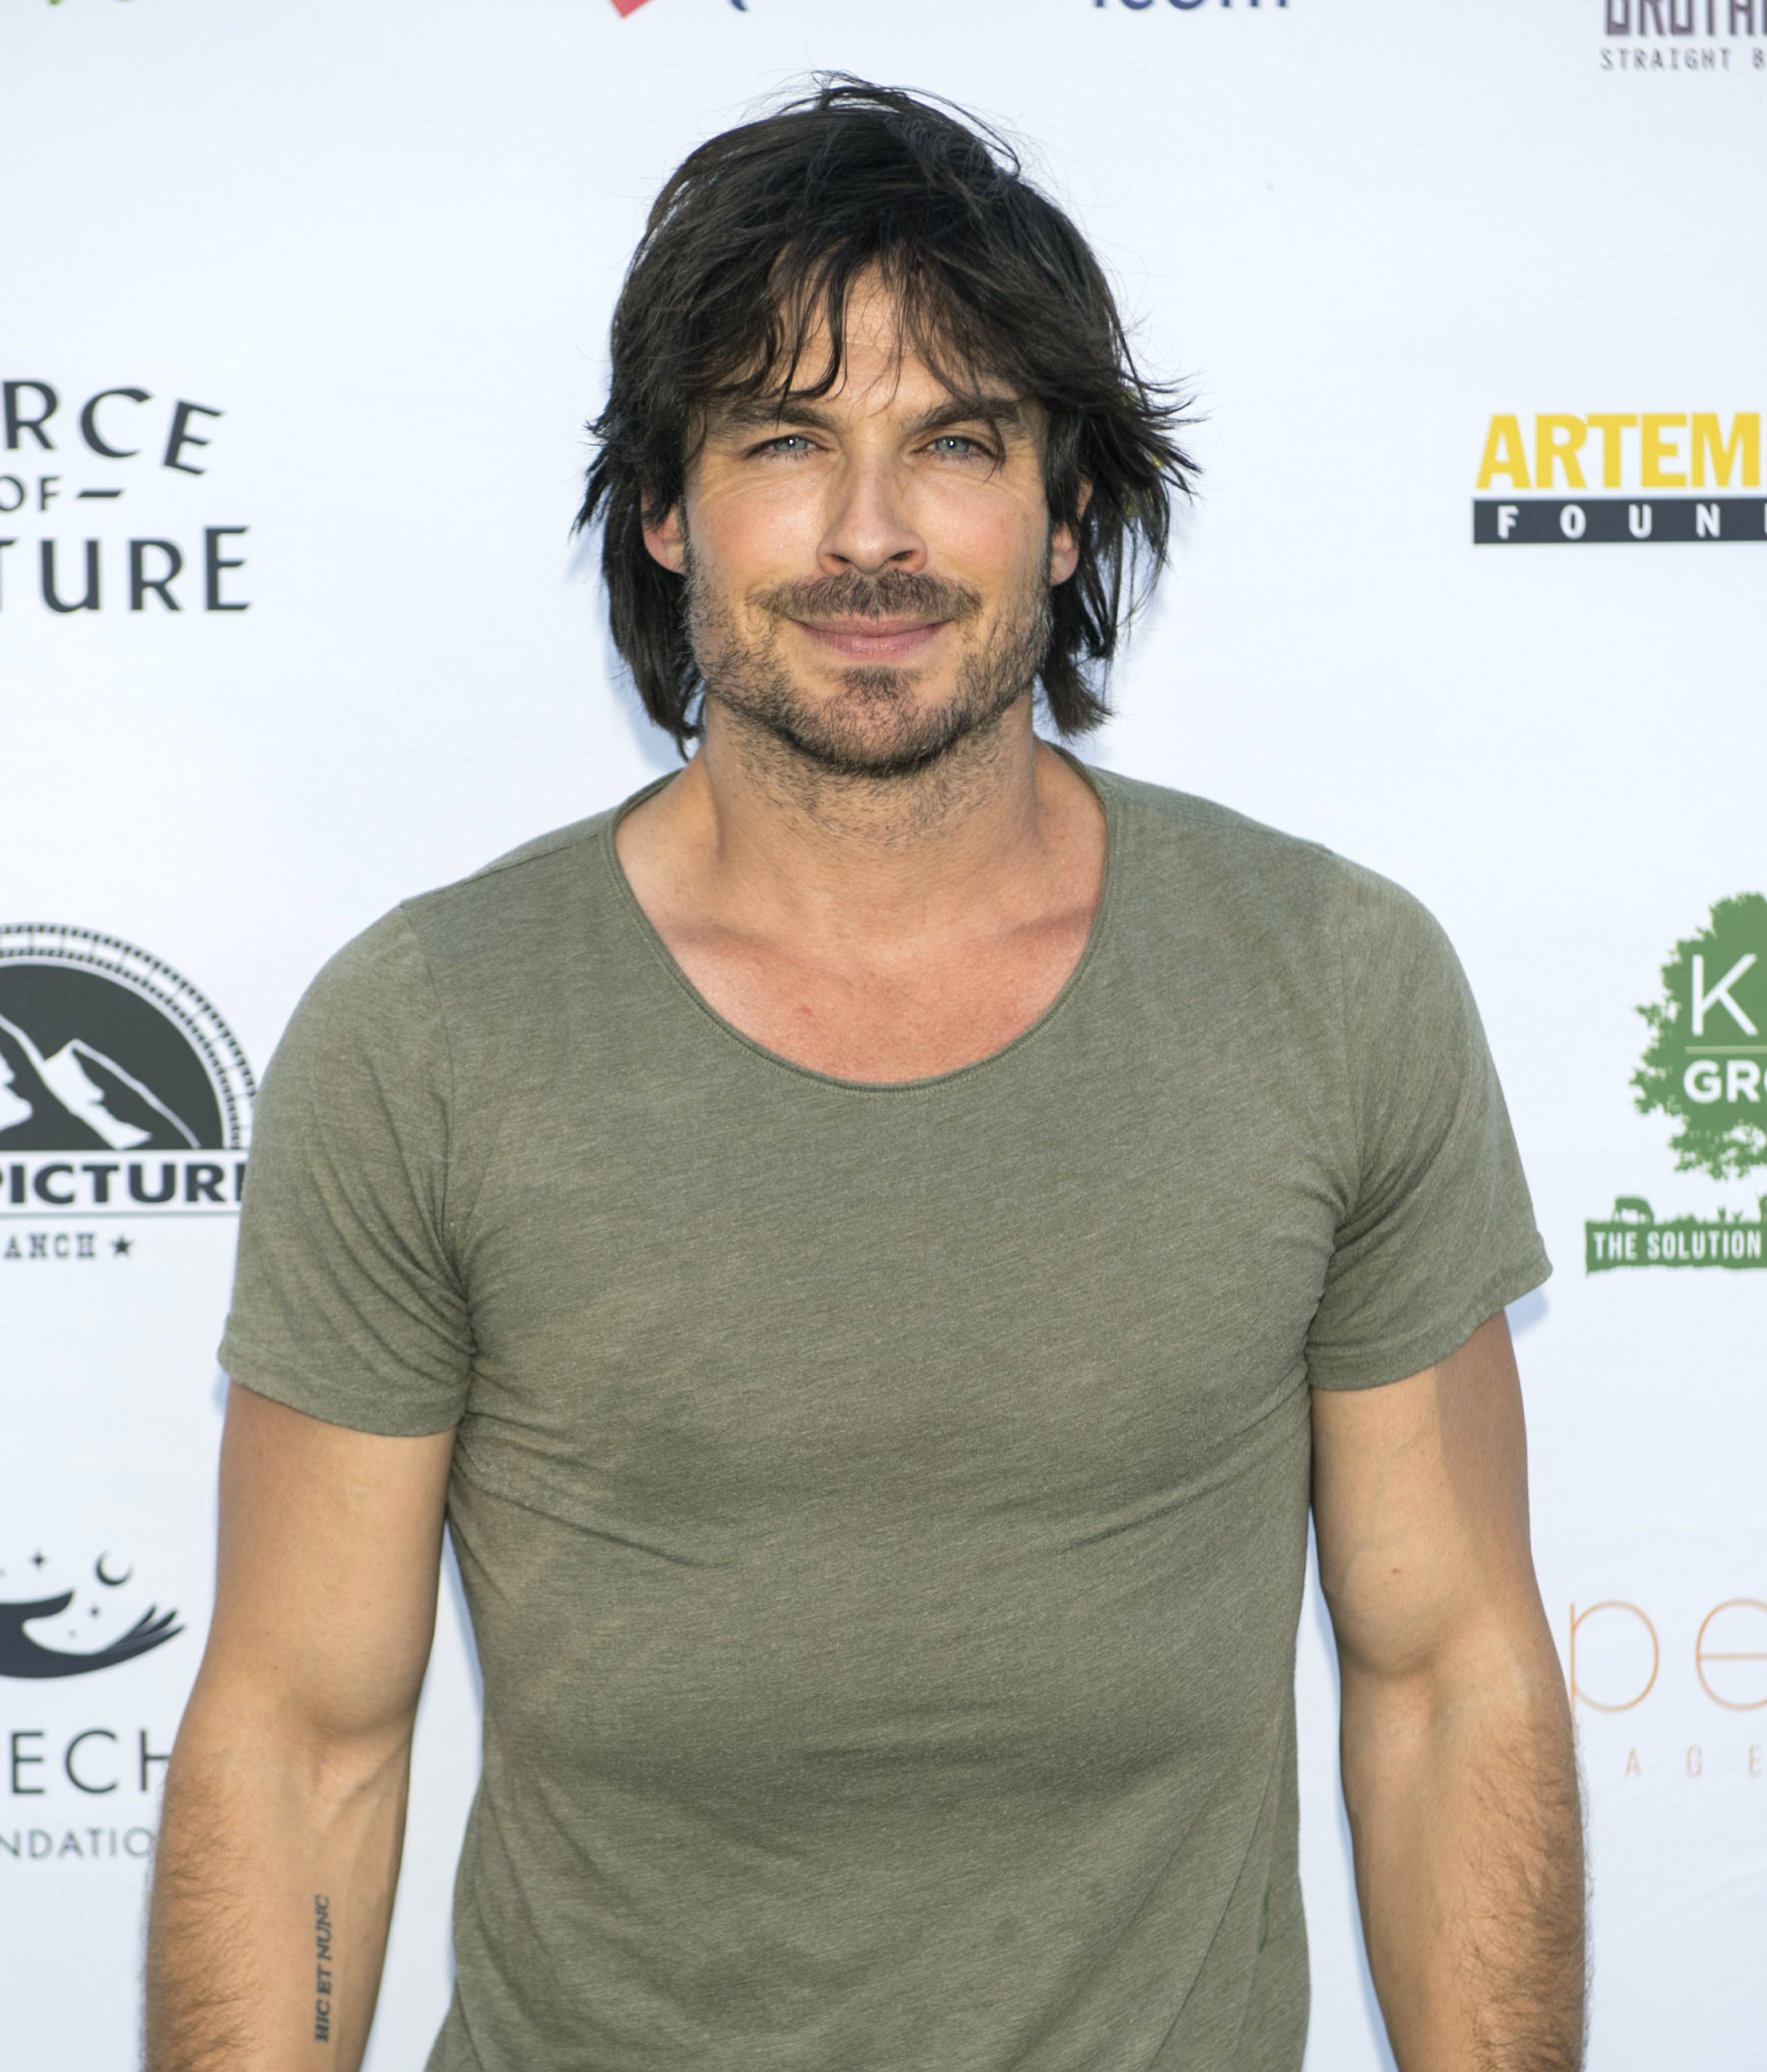 Close-up of Ian at a media event wearing a short-sleeved T-shirt